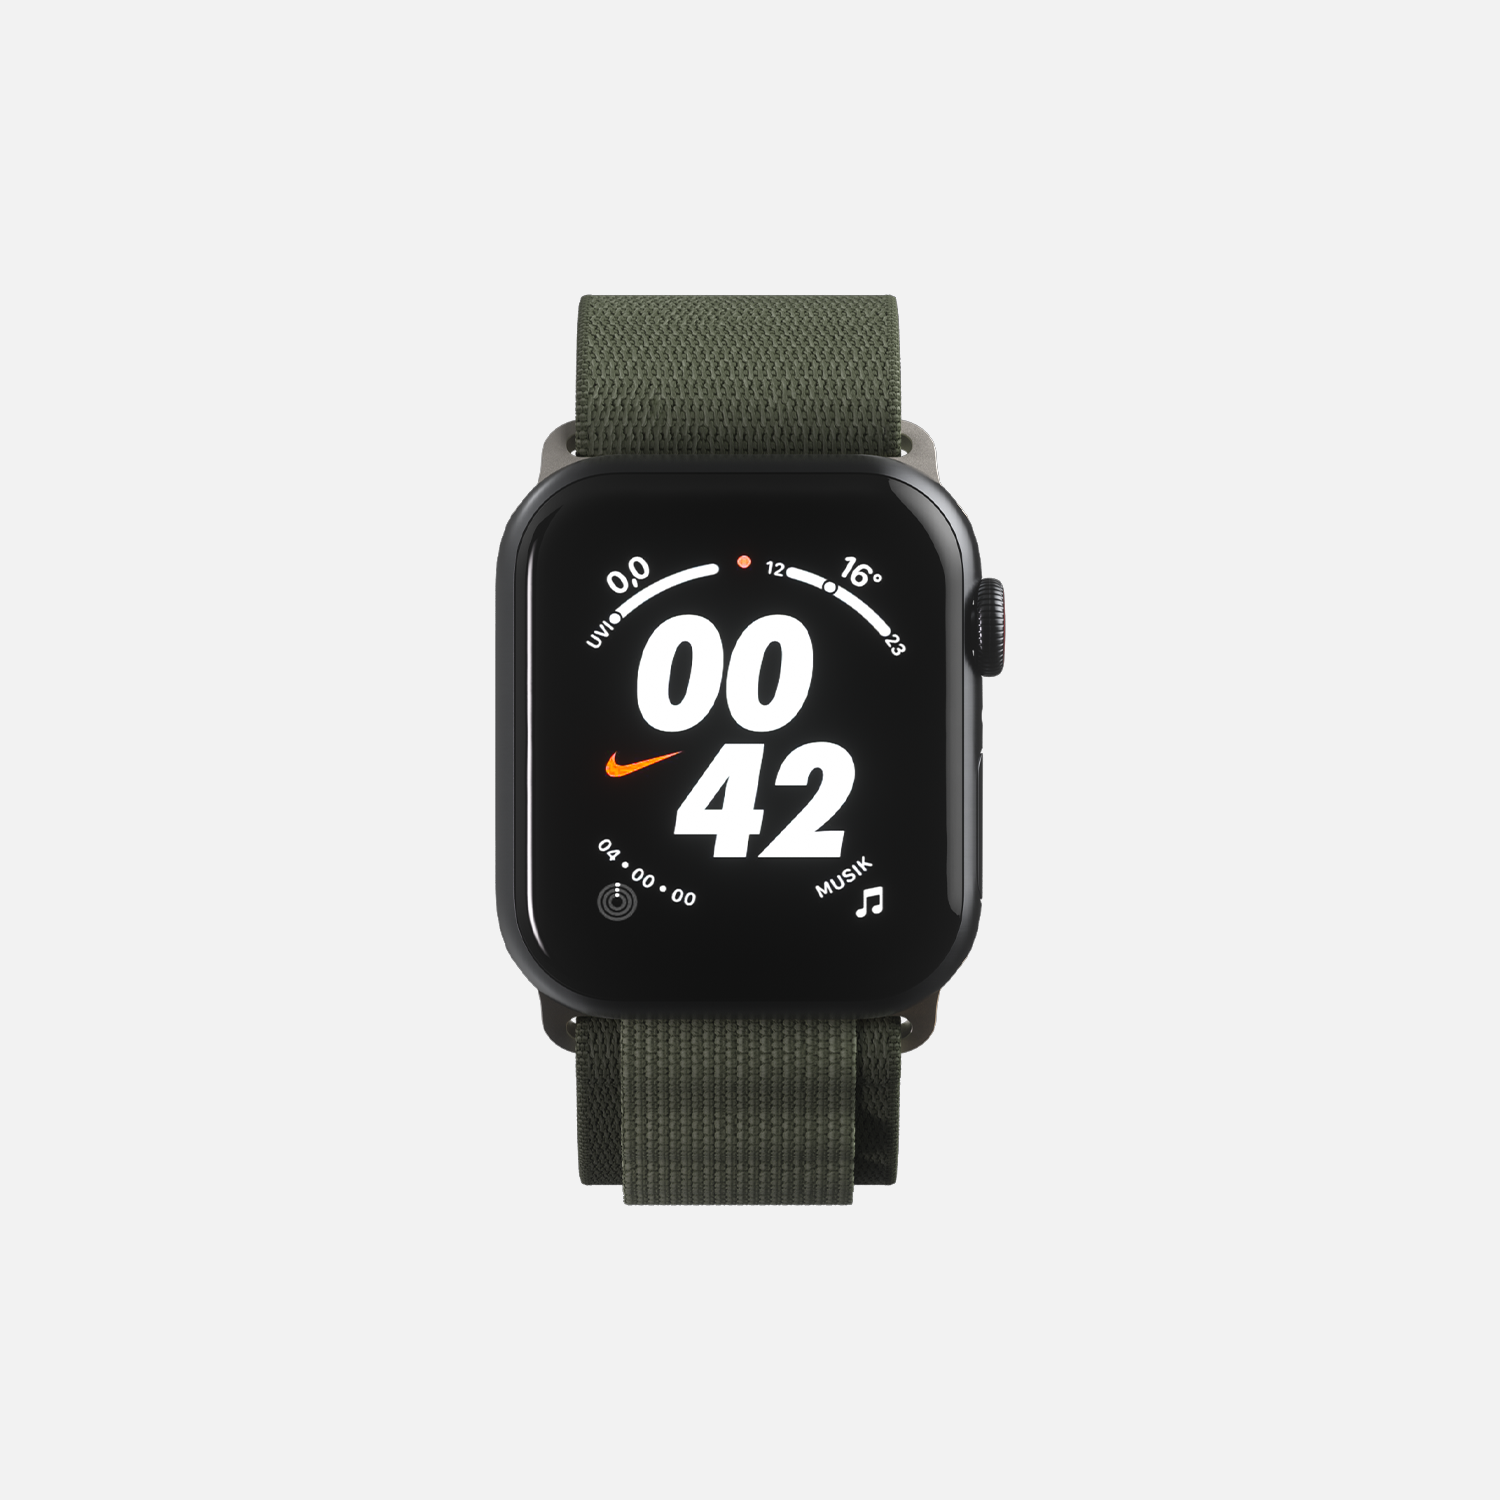 Smartwatch with sage green strap displaying Nike-themed digital clock face.